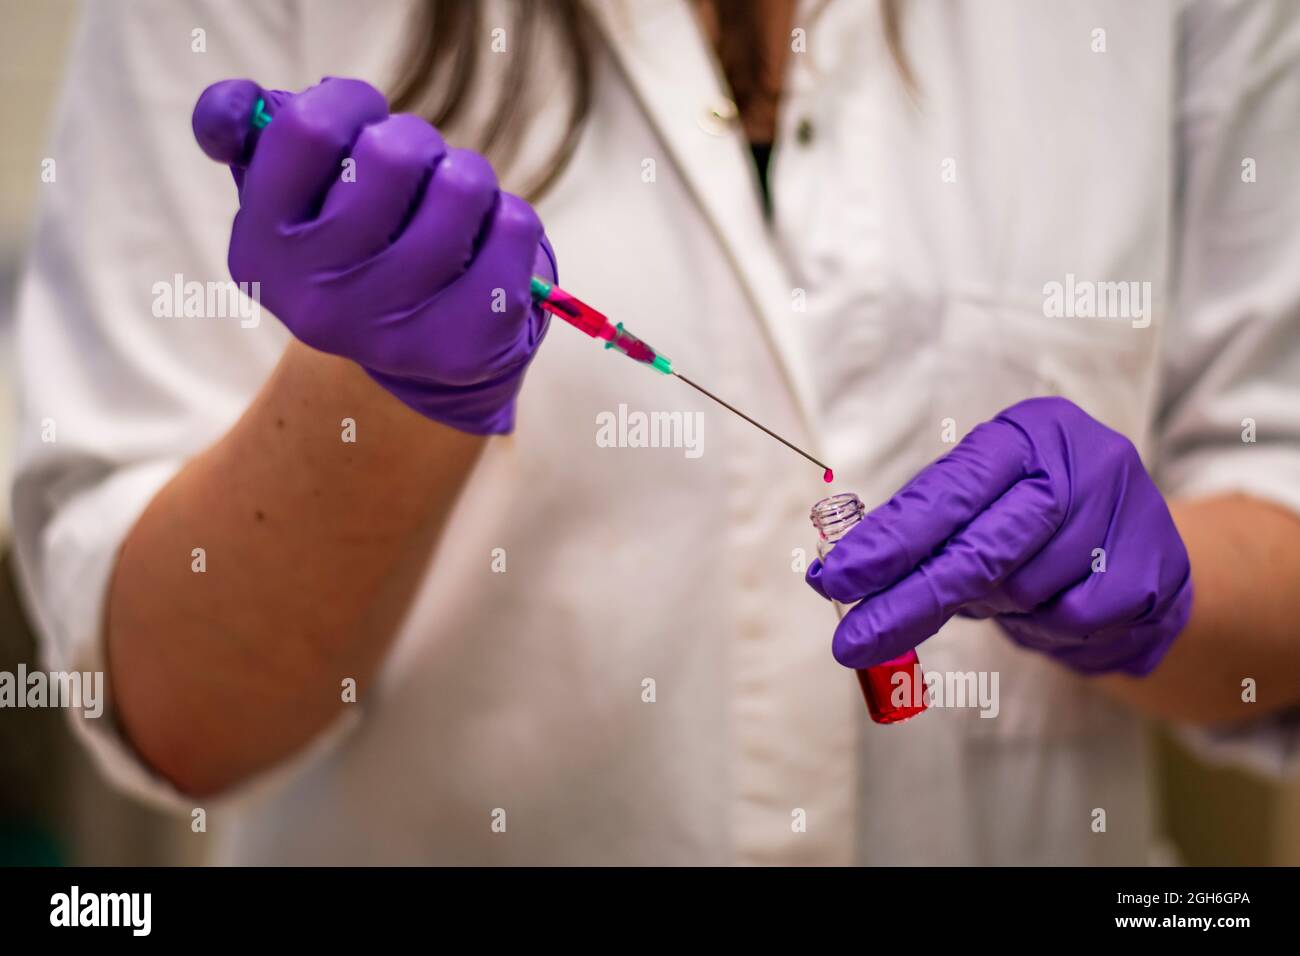 An european woman scientist adding toxic reagent carefully in a chemistry laboratory wearing gloves and lab coat as protective measure for bacterial r Stock Photo